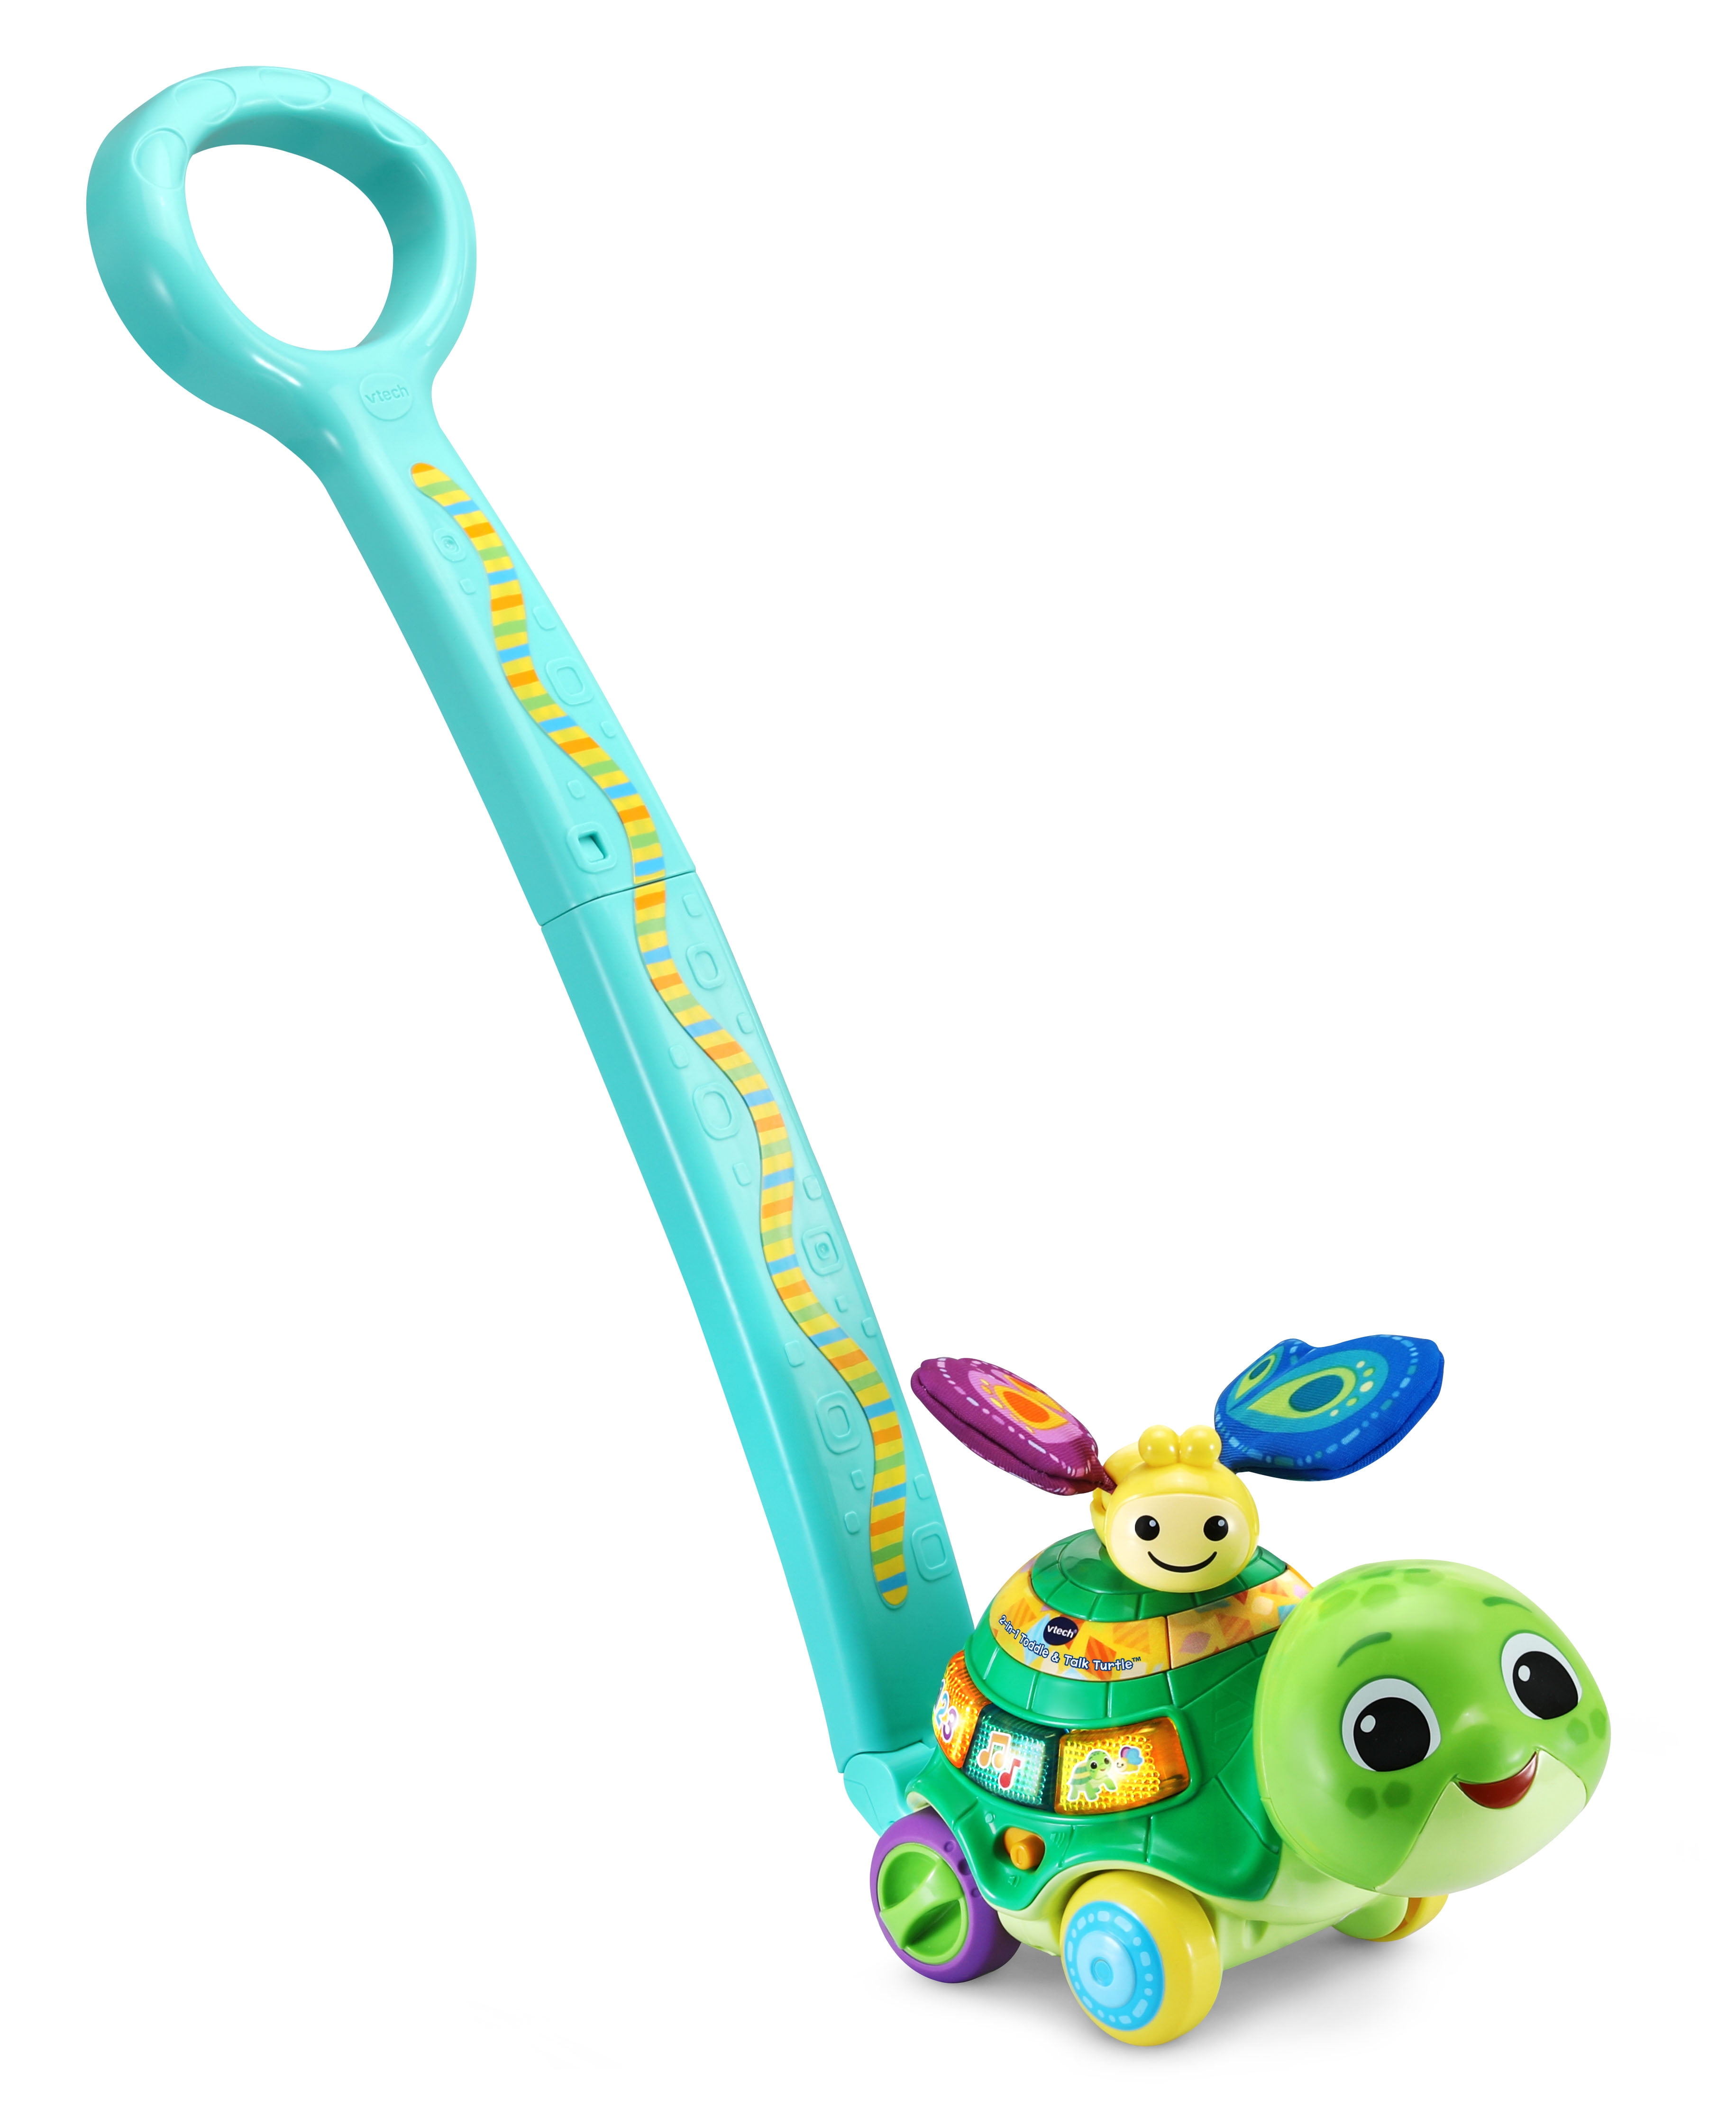 12 Months and Up Pull & Pull Toys for Toddlers-Boys & Girls 1-2 Years Old Crab KIDDOS Pull Along Rolling Animal Toy